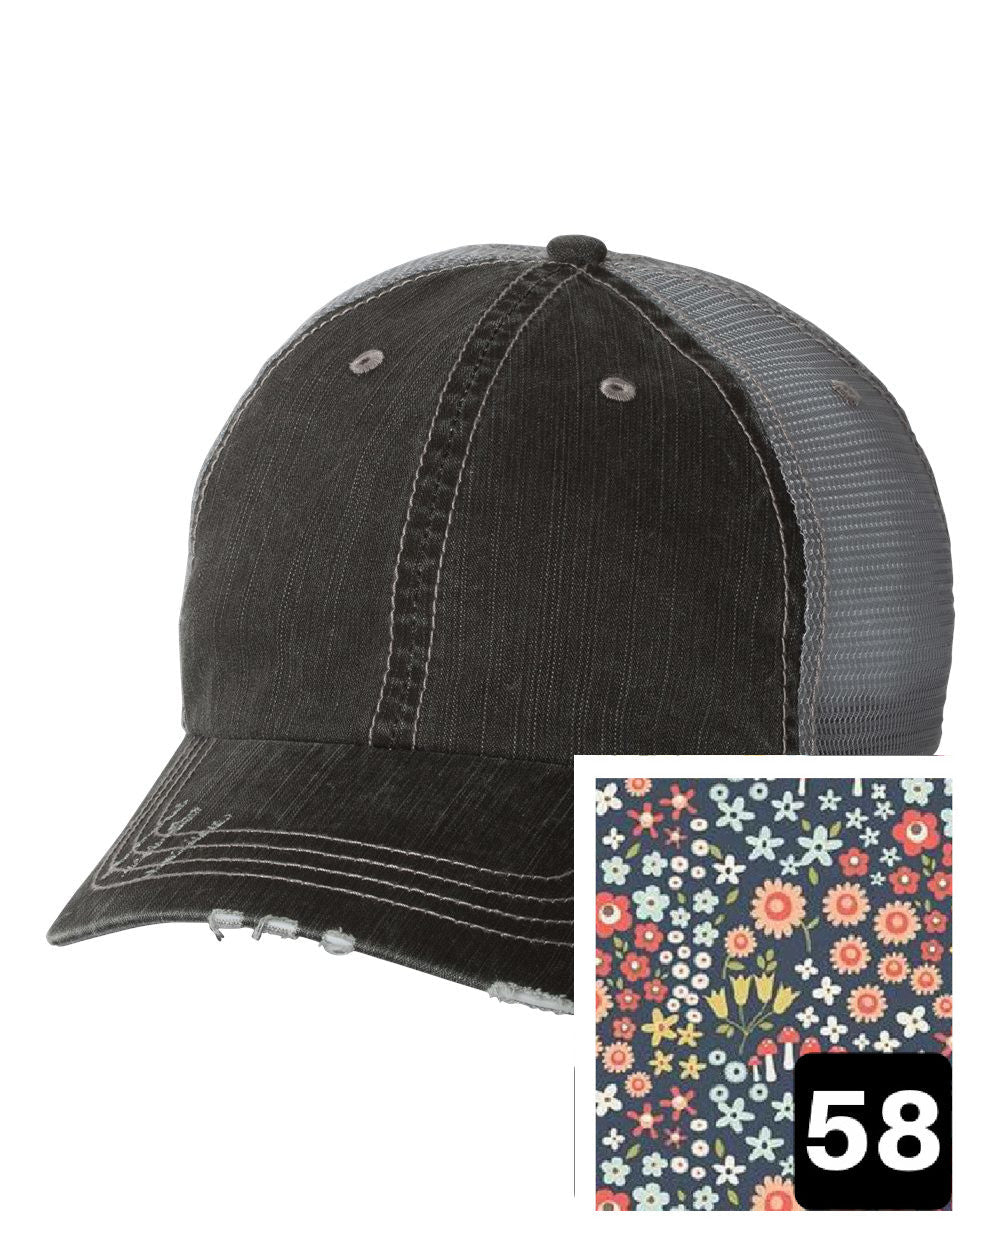 gray distressed trucker hat with white daisy on yellow fabric state of Maine